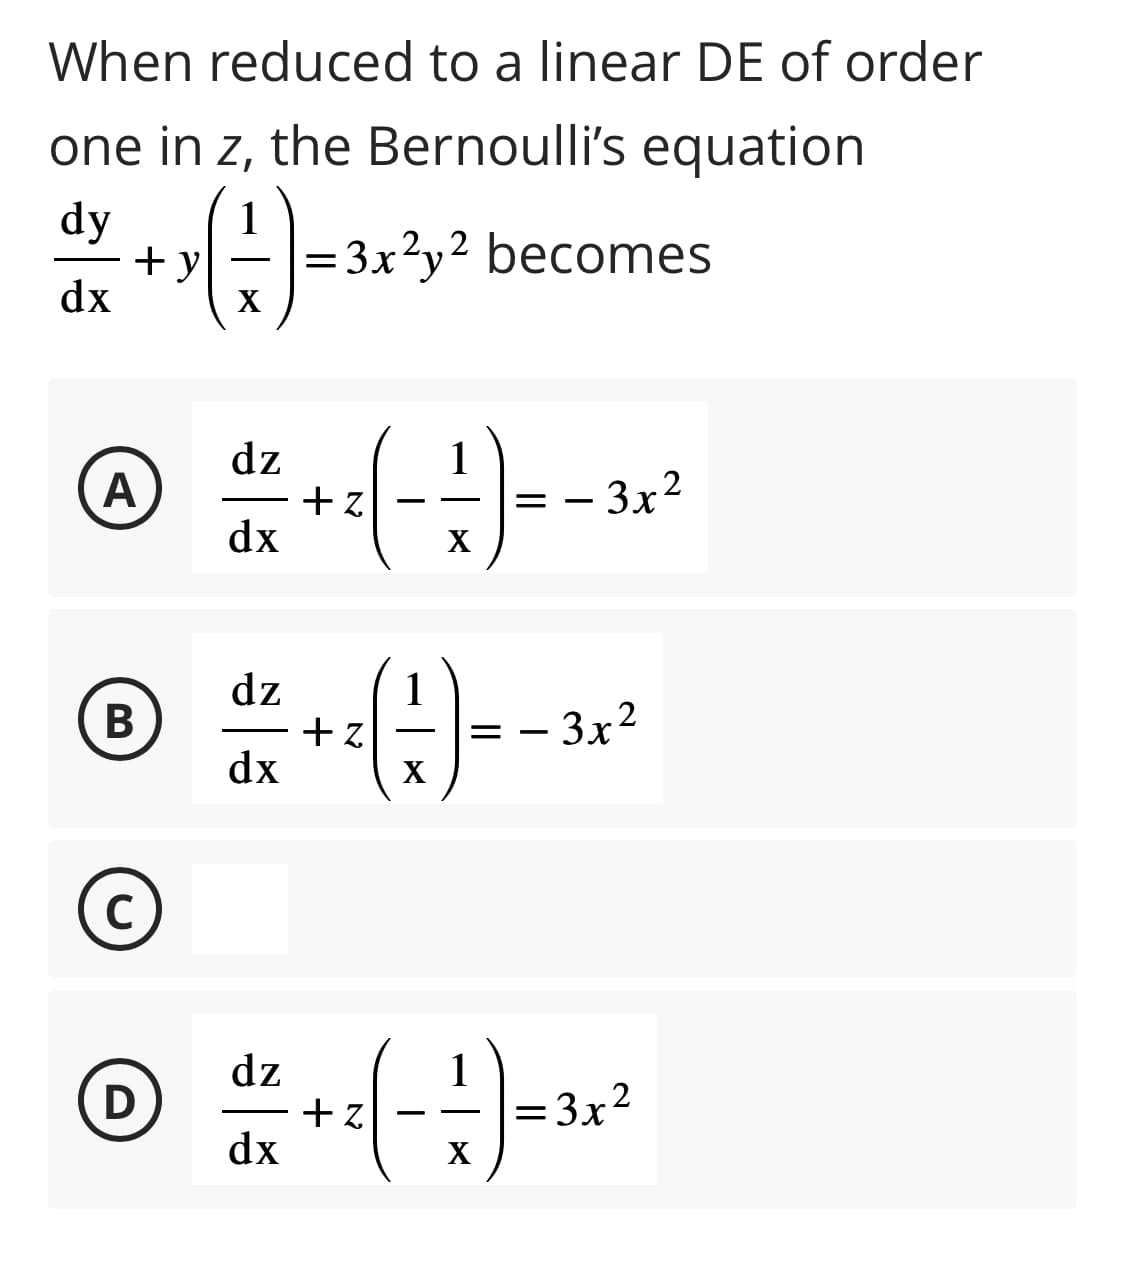 When reduced to a linear DE of order
one in z, the Bernoulli's equation
dy
( 1 ) = 3 x ²
dx
X
+y
A
B
C
D
dz
dx
dz
dx
dz
dx
= 3x²y² becomes
+z
+z
(1)
X
-=-=
X
+z
=
X
3x²
-
3x²
= 3x²